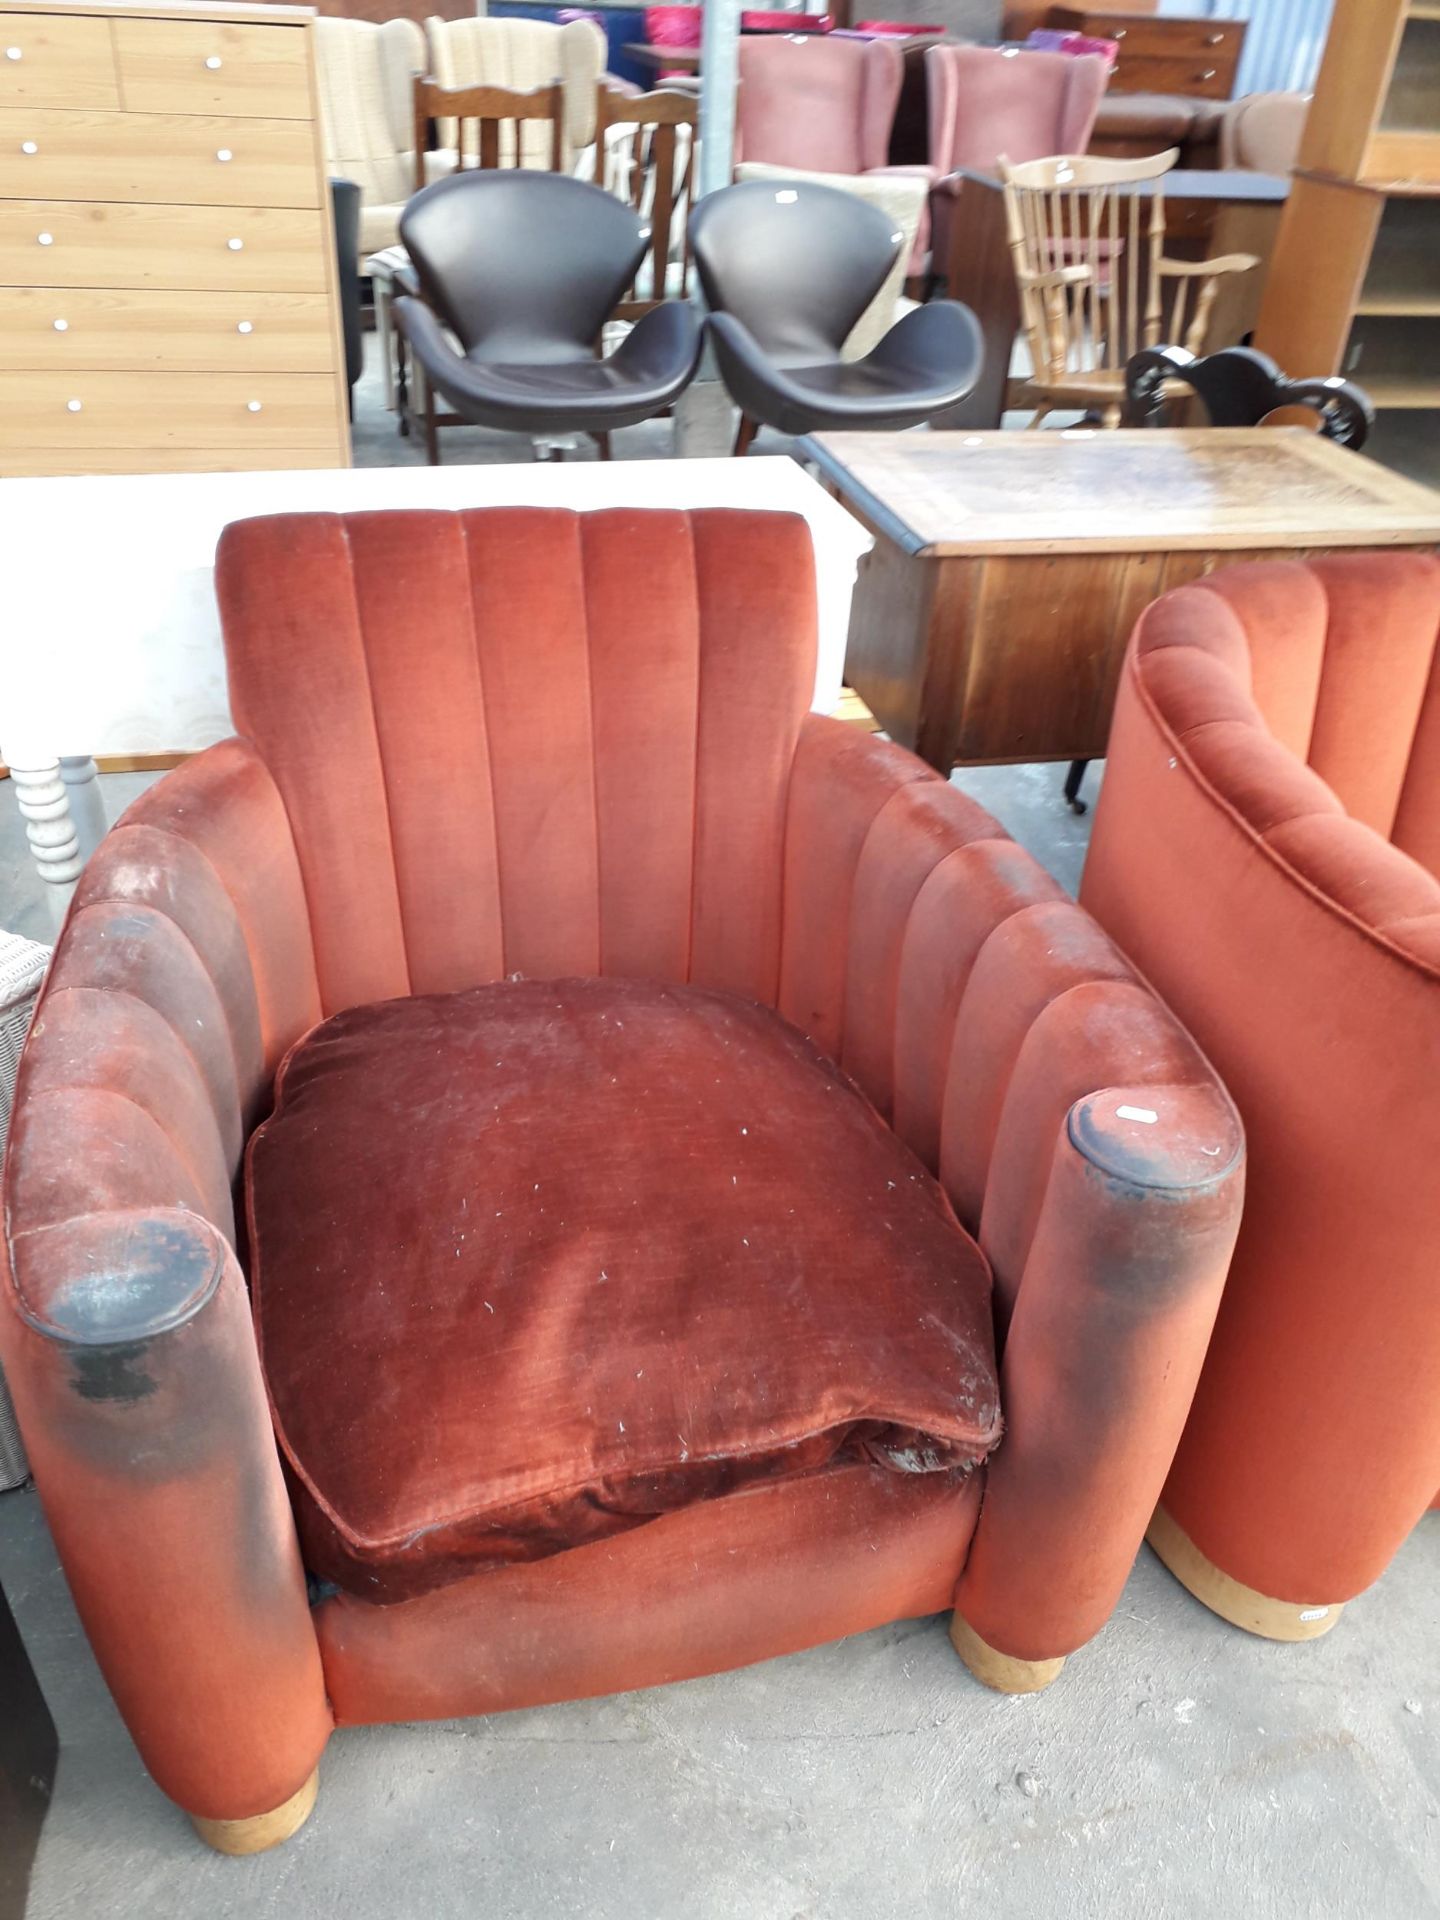 AN ART DECO THREE PIECE LOUNGE SUITE, SPRUNG AND UPHOLSTERED, WITH SWEPT ARMS - Image 4 of 4